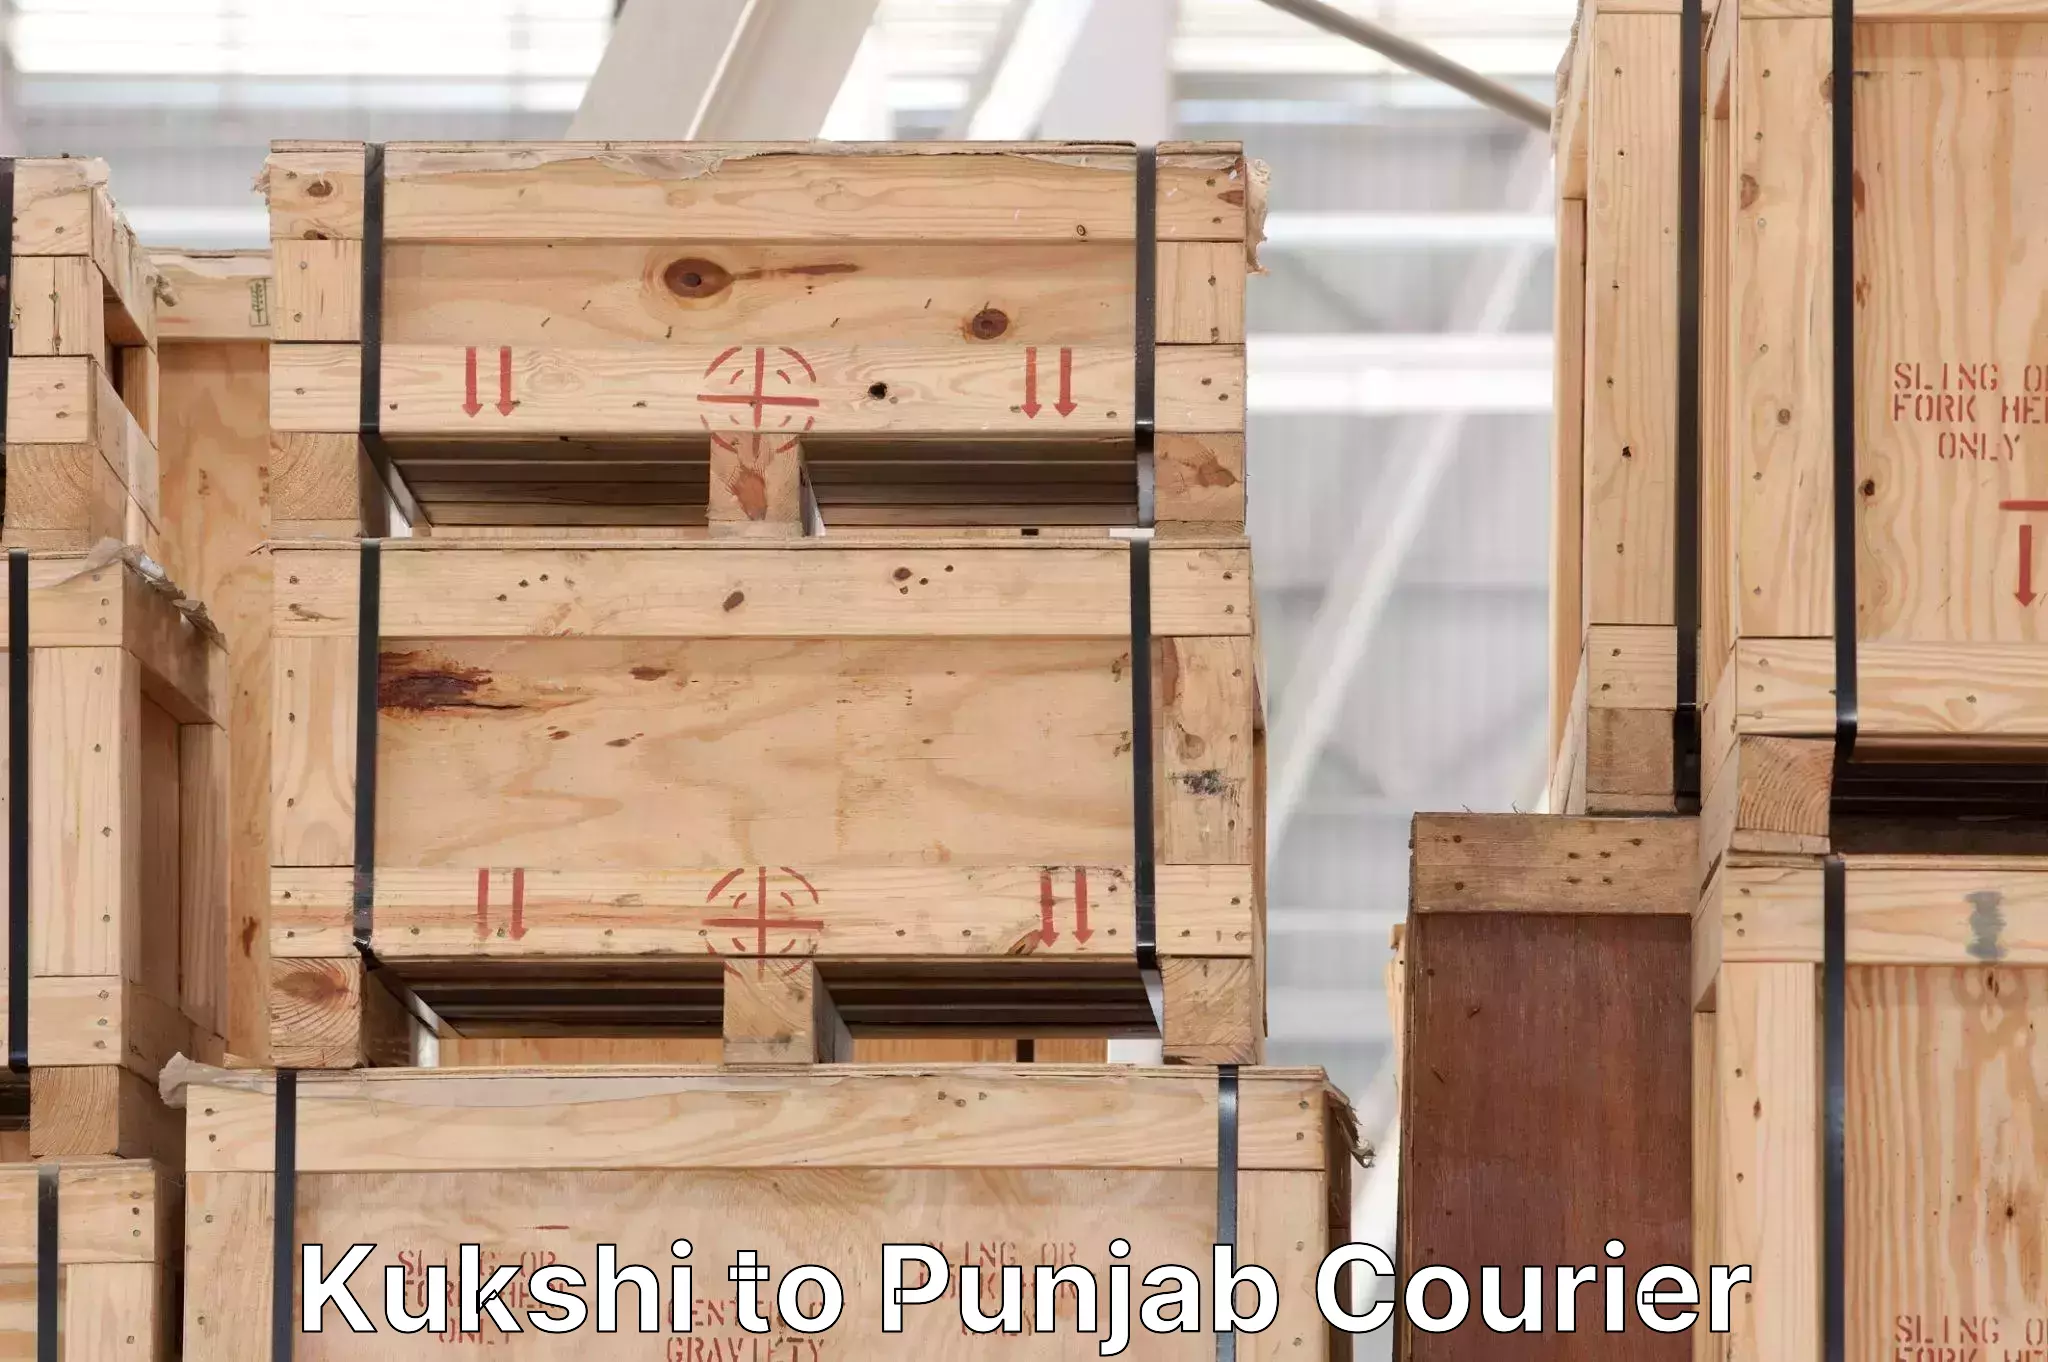 Personal courier services Kukshi to Punjab